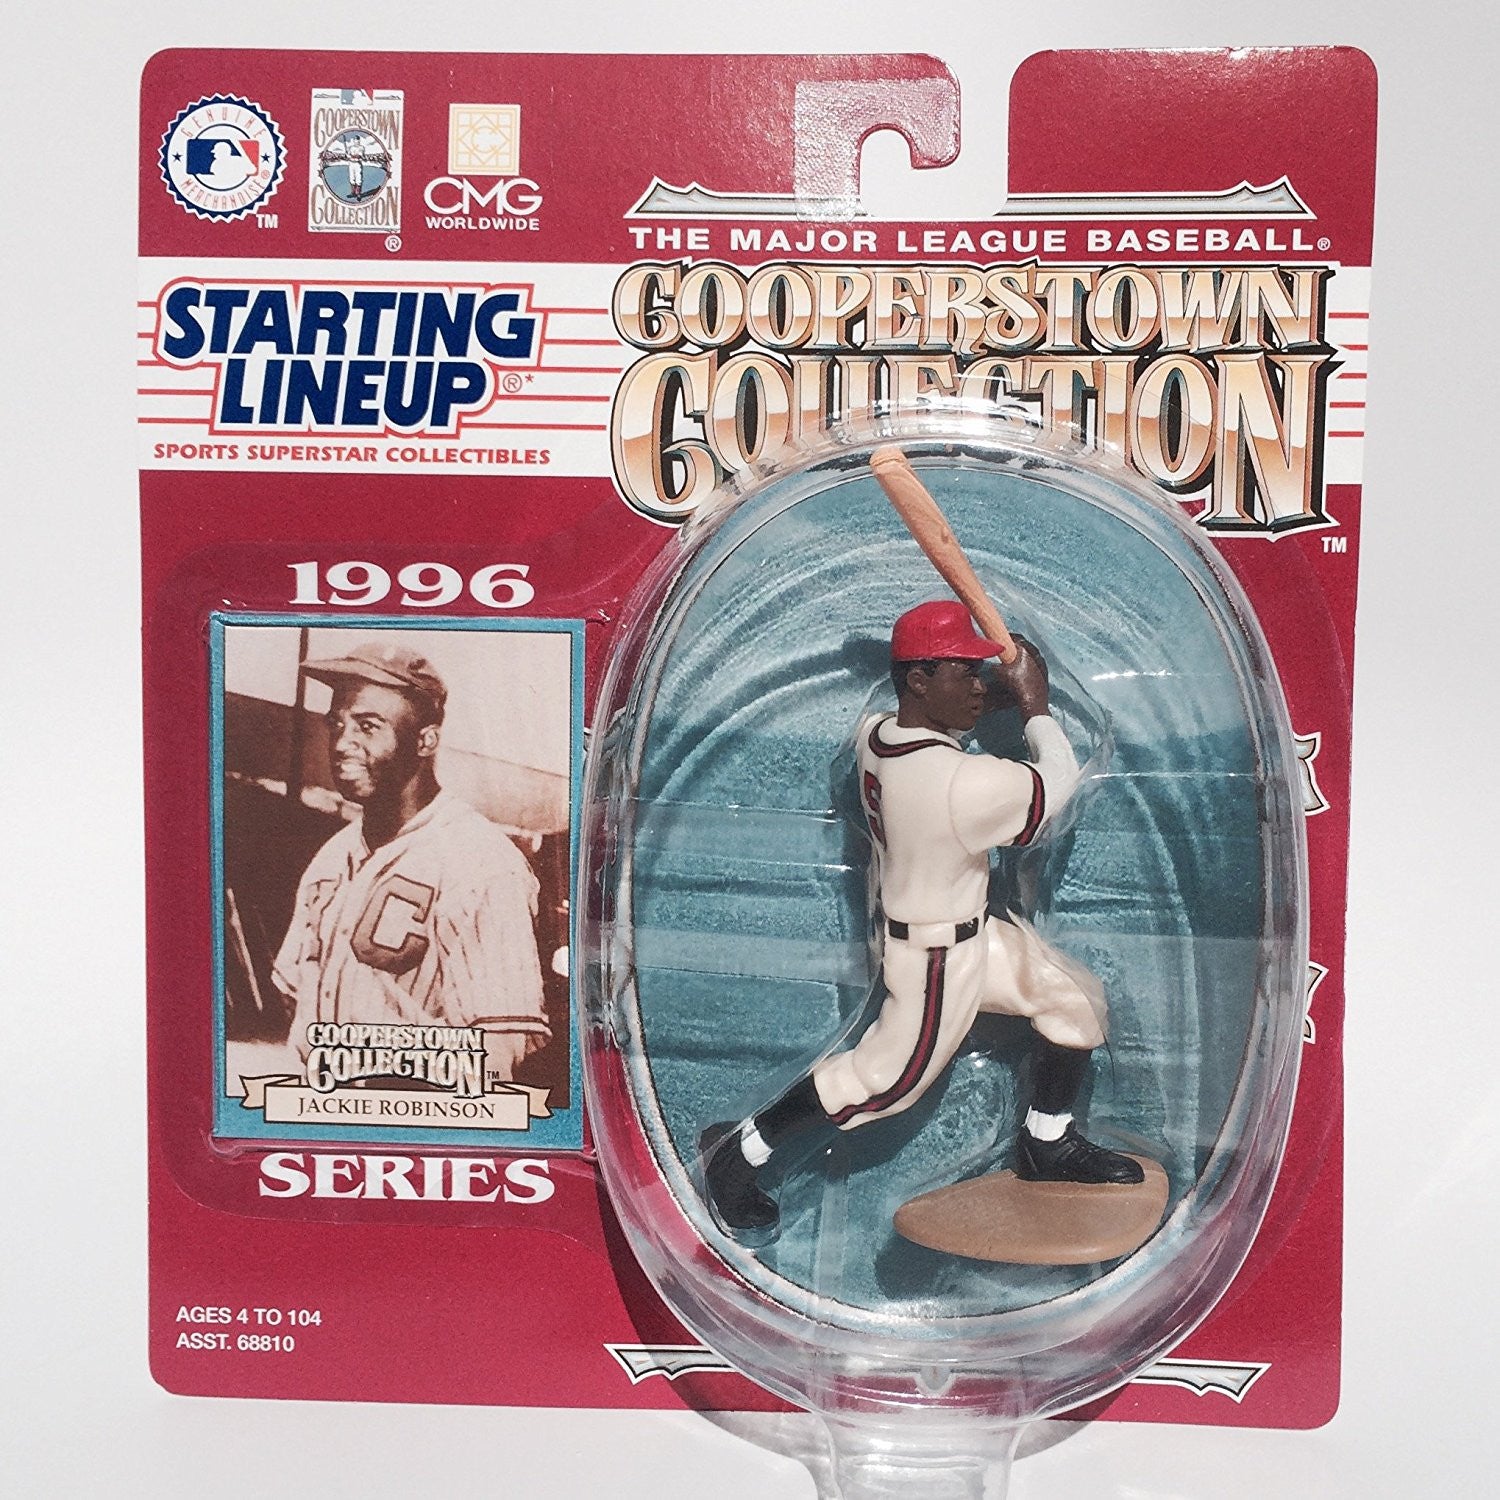 Starting Lineup Cooperstown Collection 1996 Series: Jackie